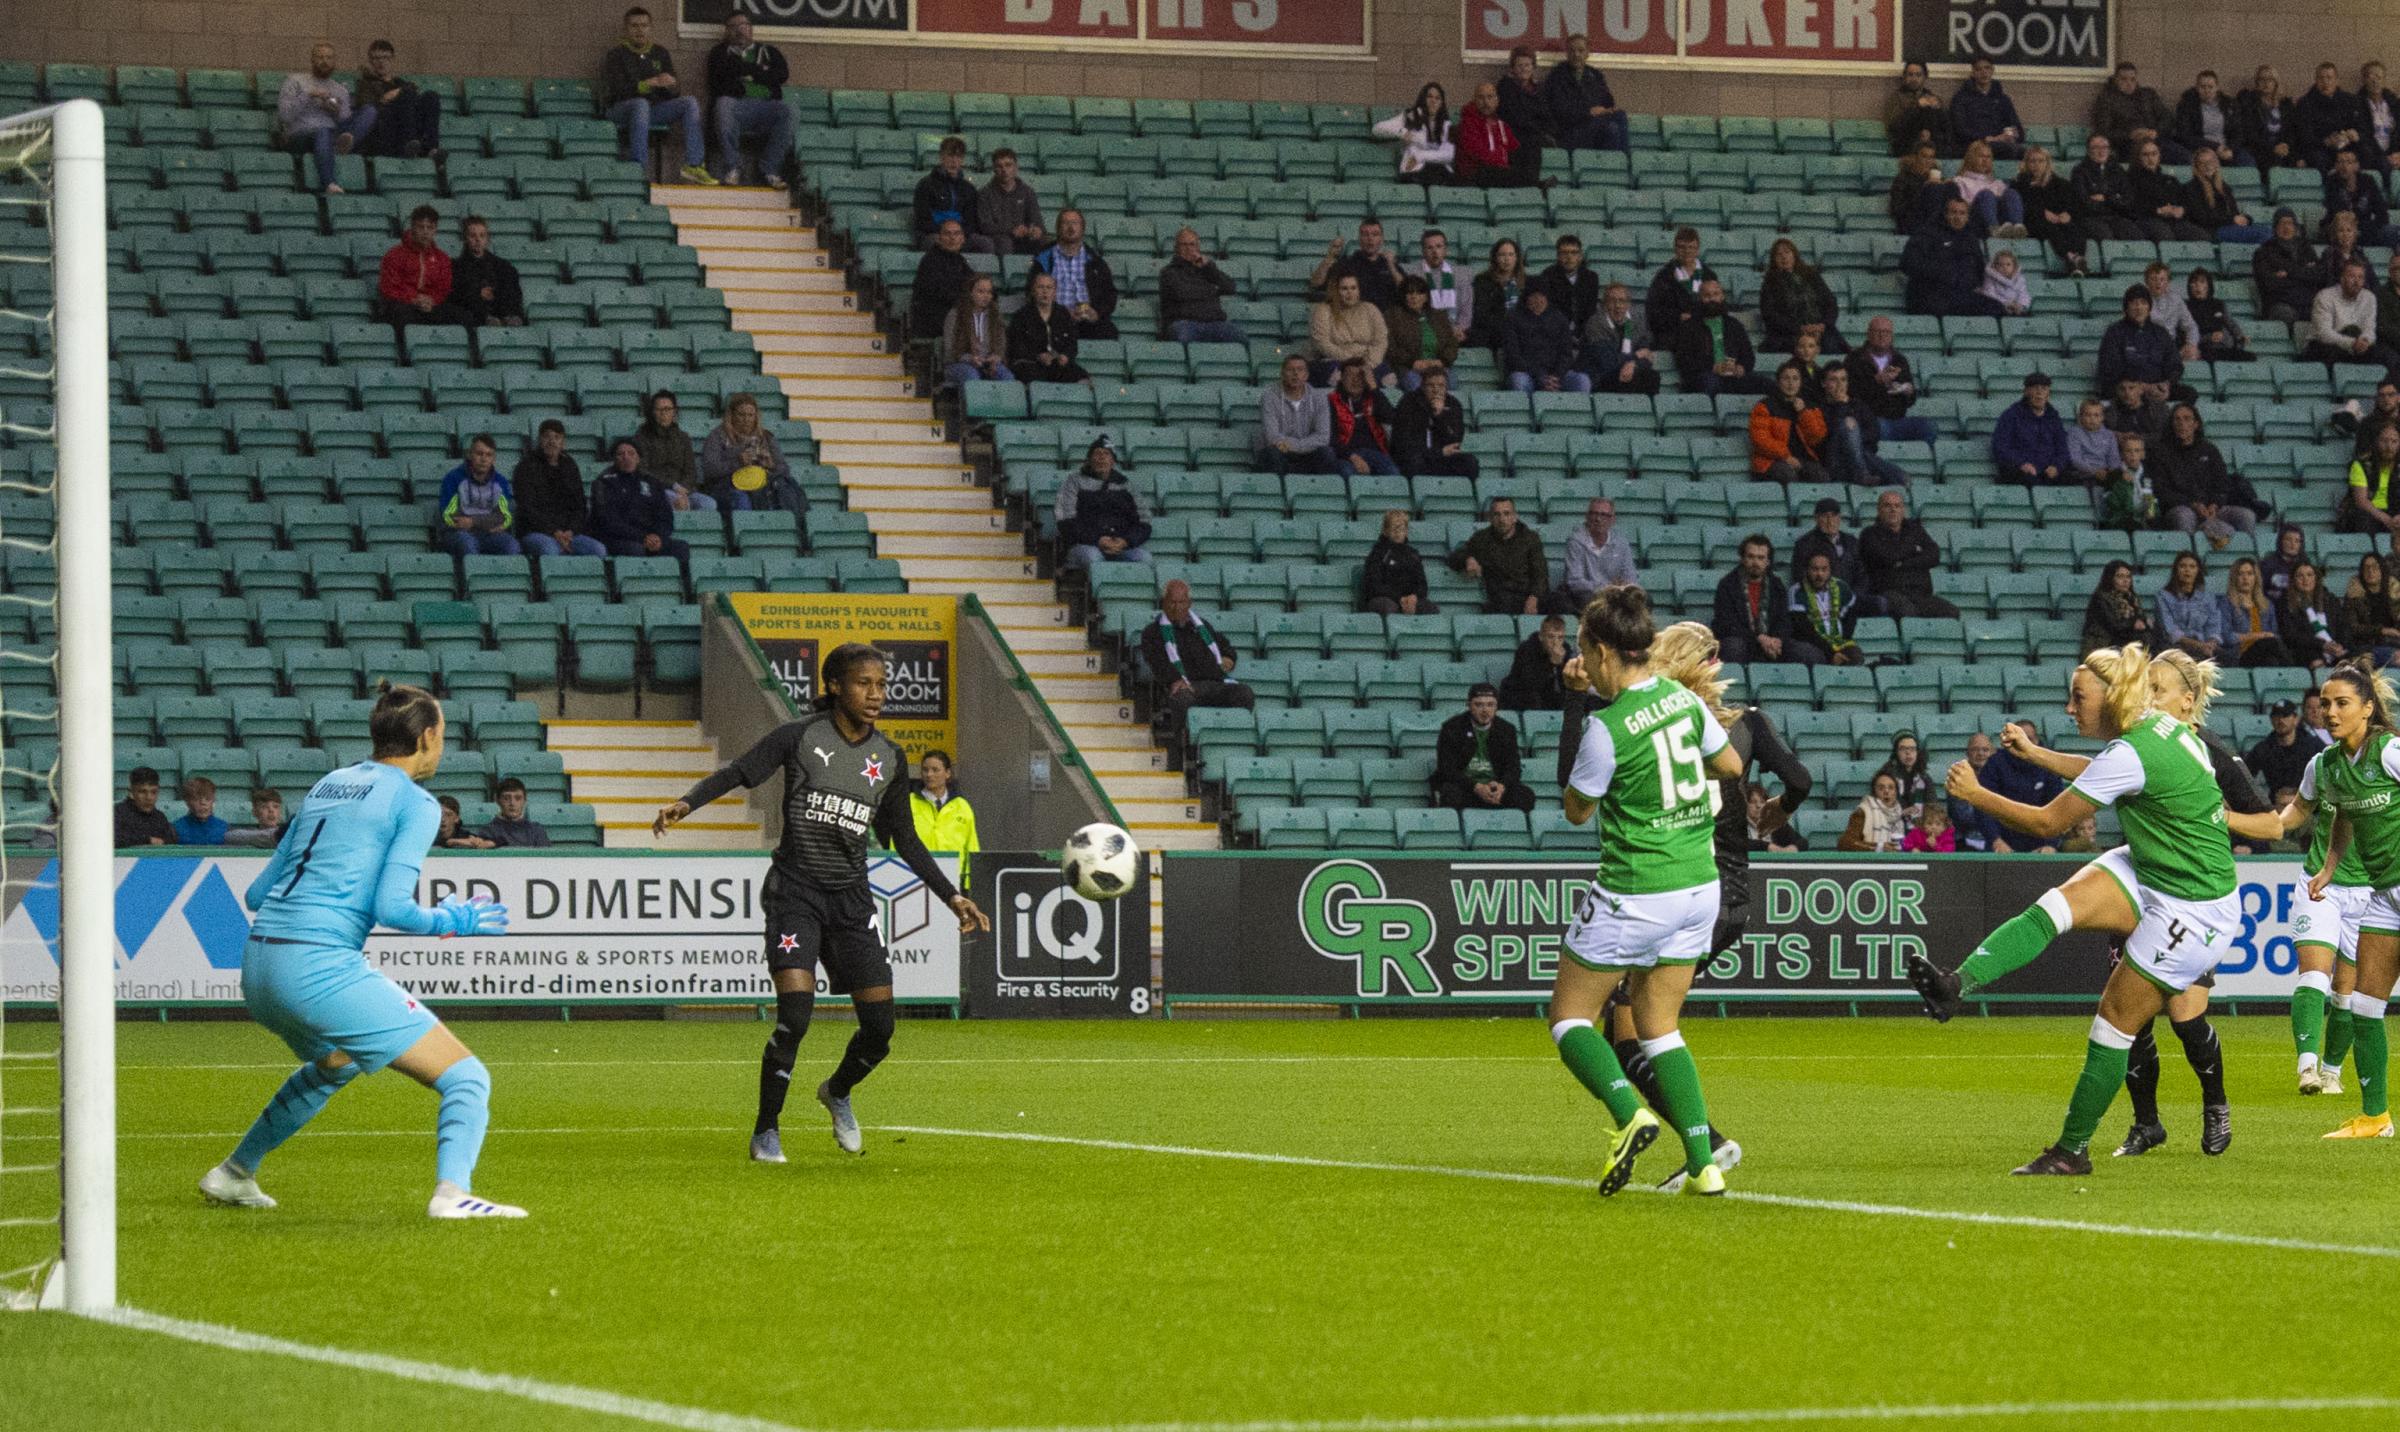 SWPL: Hibs lead the way again with league match set for record crowd